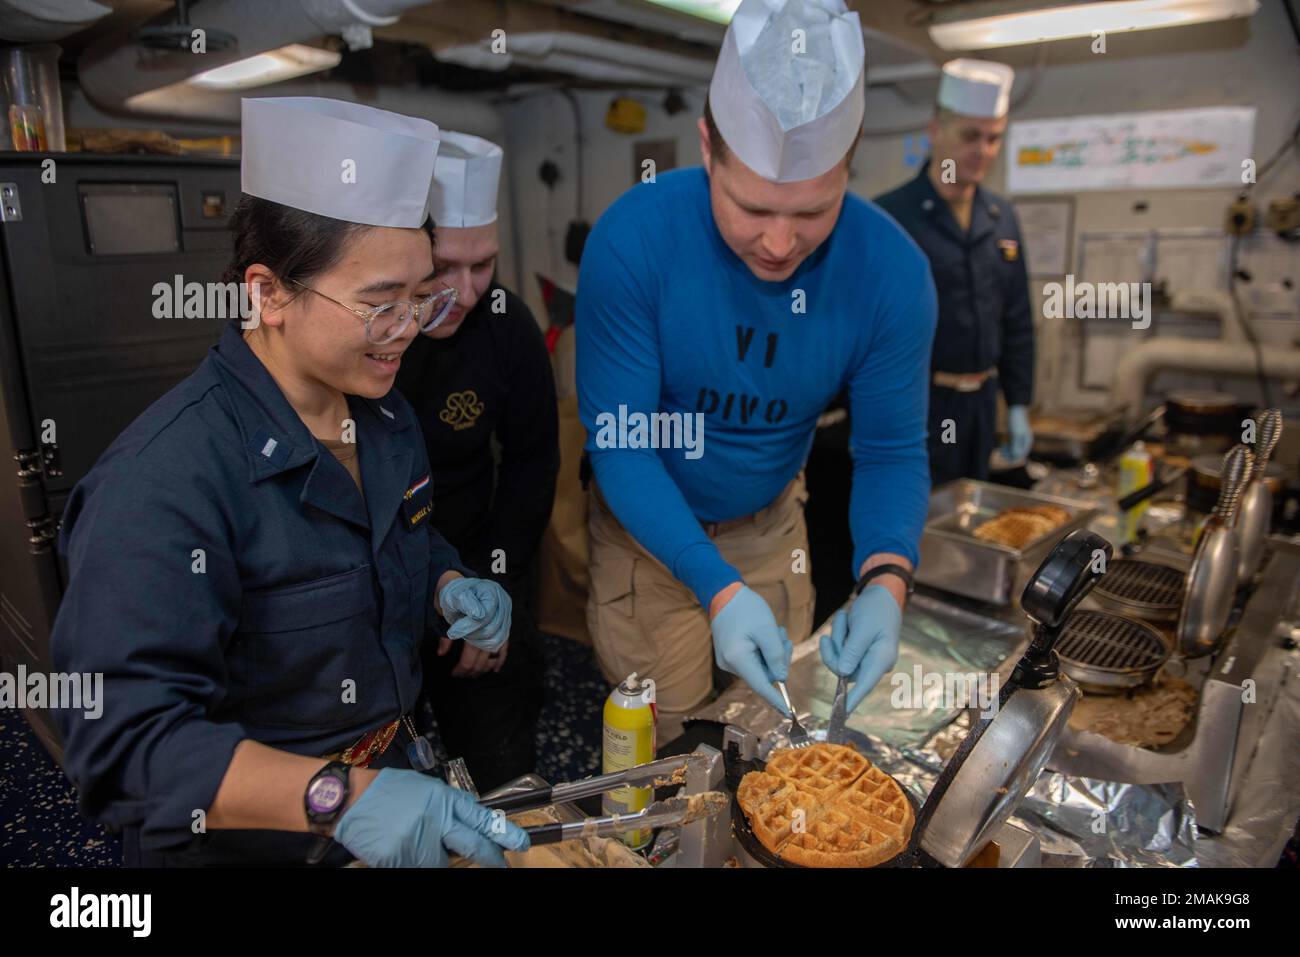 220529-N-UF592-1015 PHILIPPINE SEA (May 29, 2022 Lt. j.g. Michelle Tran, left, from Centreville, Virginia, and Lt. Thomas Whiting, from Baltimore, prepare waffles on the aft mess deck of the U.S. Navy’s only forward-deployed aircraft carrier, USS Ronald Reagan (CVN 76). Each Sunday at sea, supply department organizes shipboard volunteers to prepare and serve brunch to more than 5,000 personnel. Ronald Reagan, the flagship of Carrier Strike Group 5, provides a combat-ready force that protects and defends the United States, and supports alliances, partnerships and collective maritime interests i Stock Photo